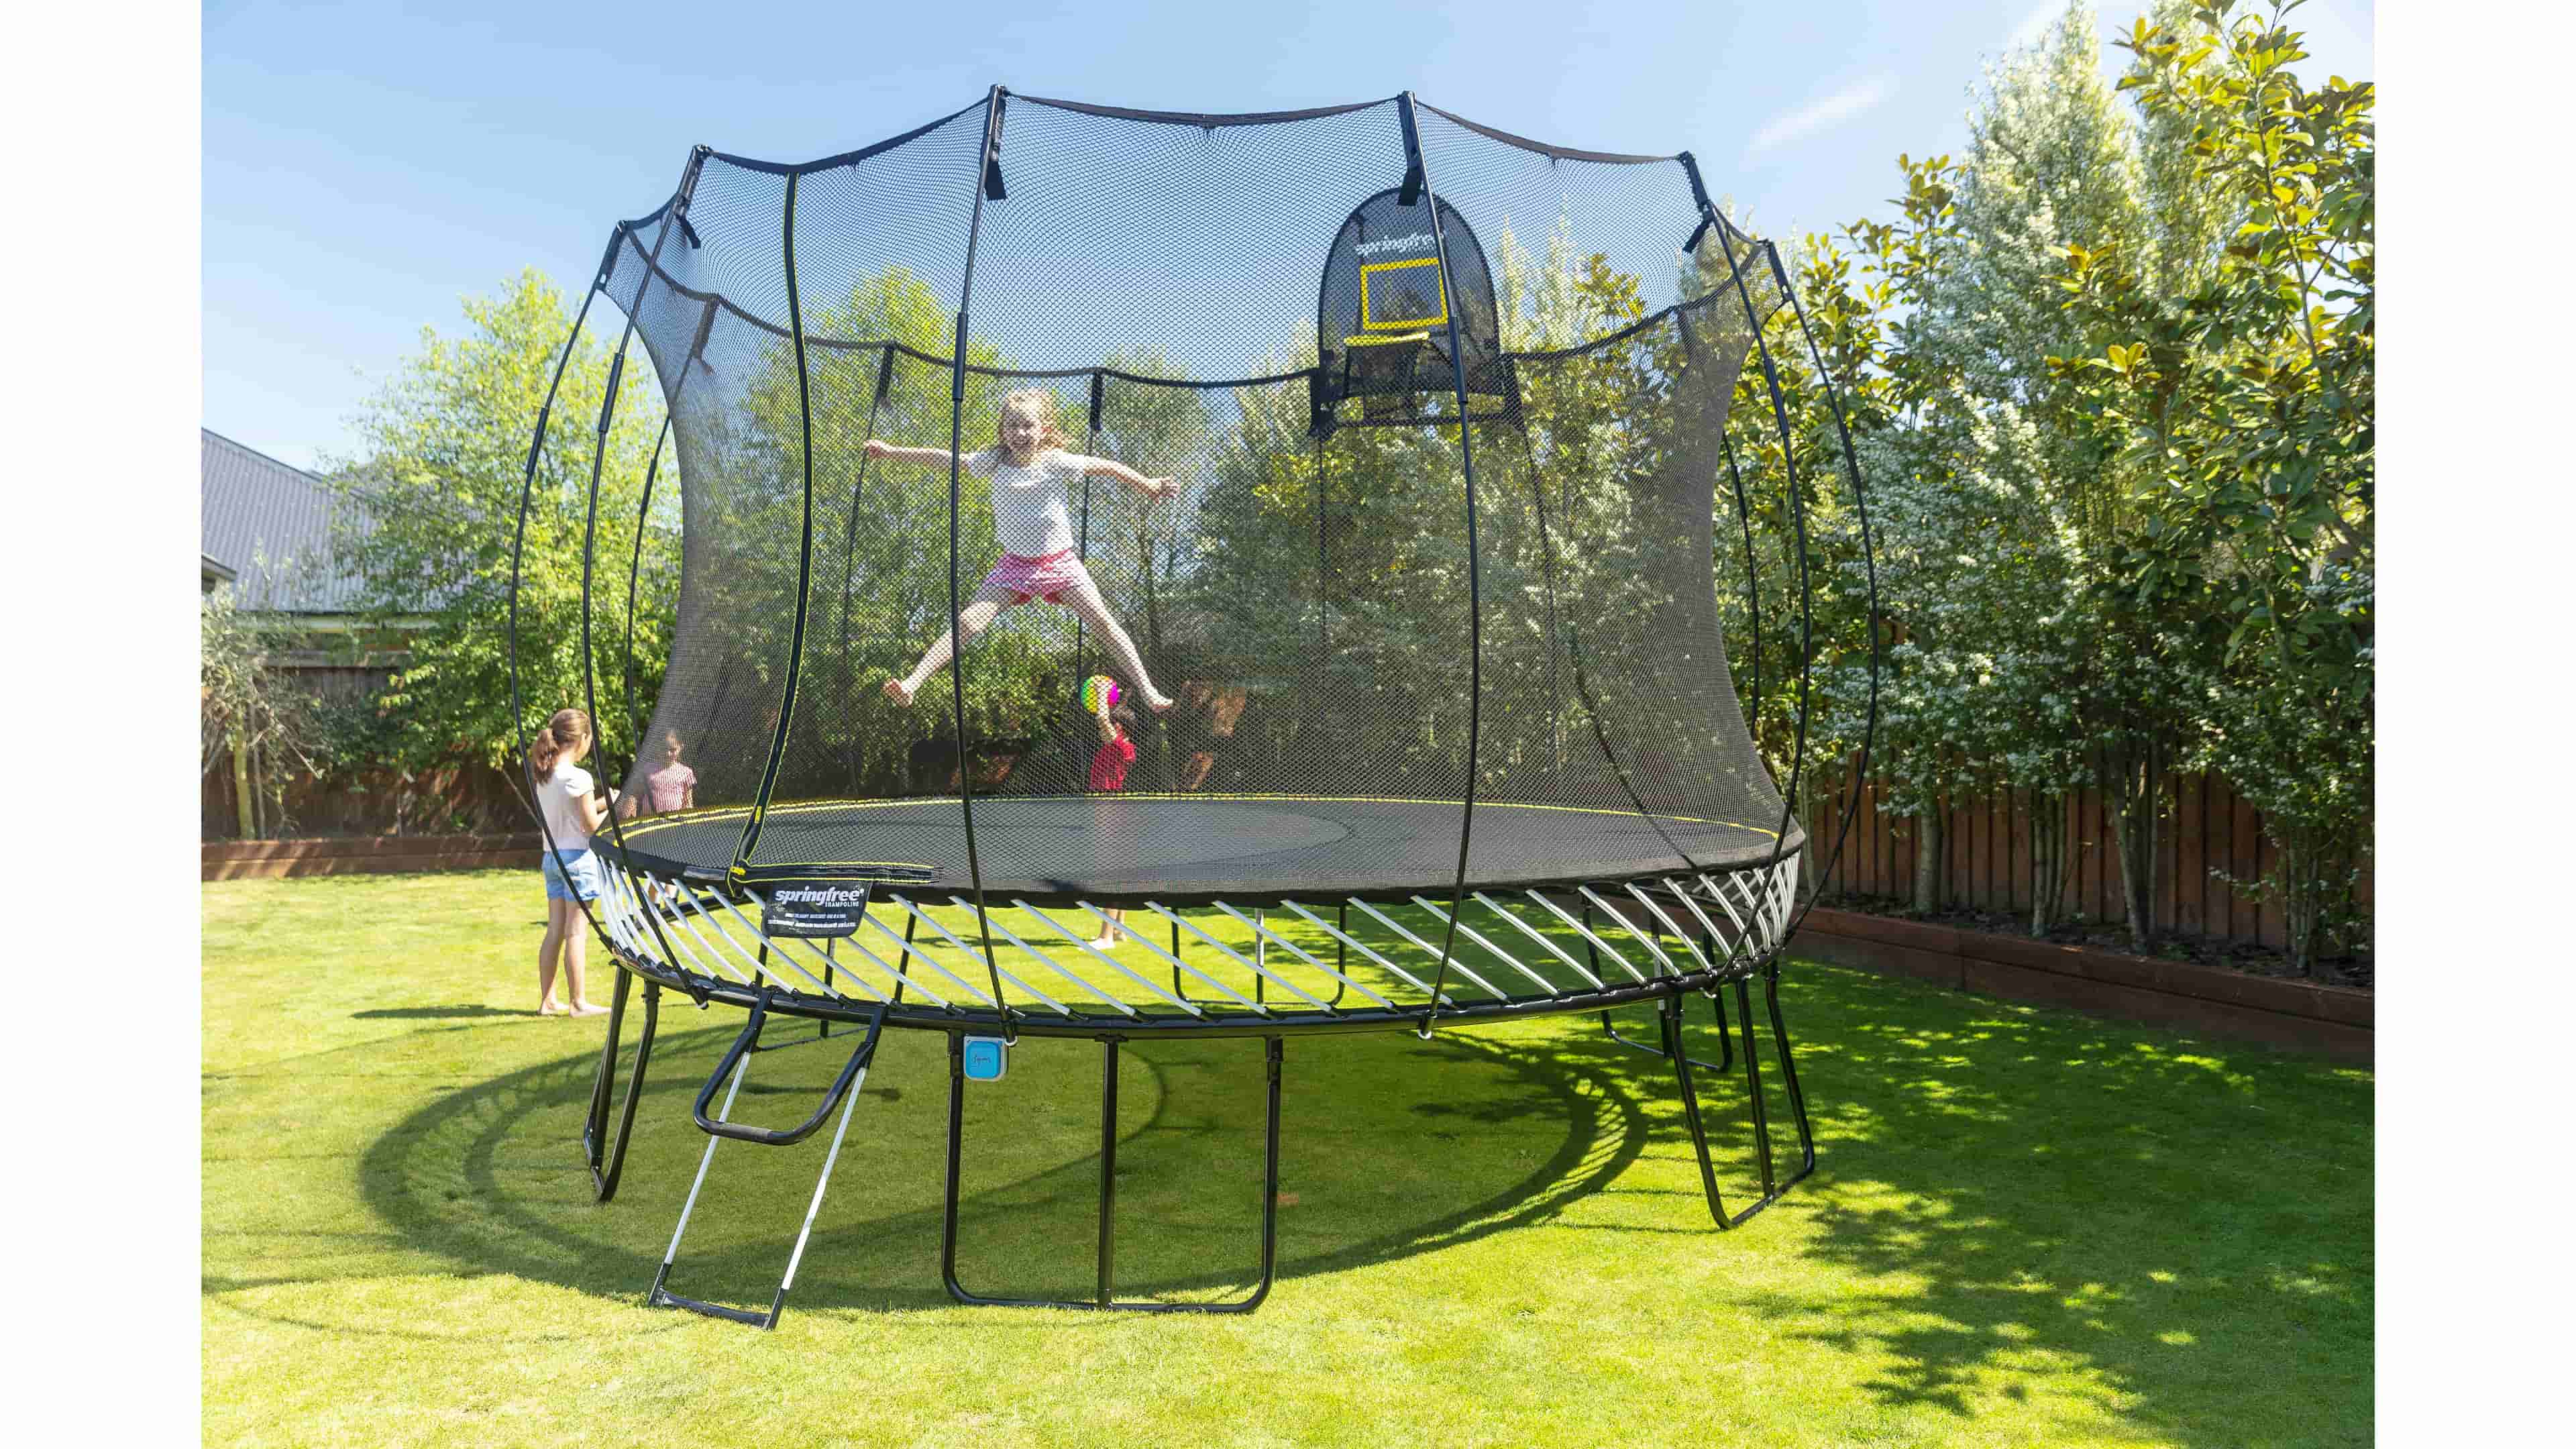 How Are Trampolines Measured? (And Why It's So Important)